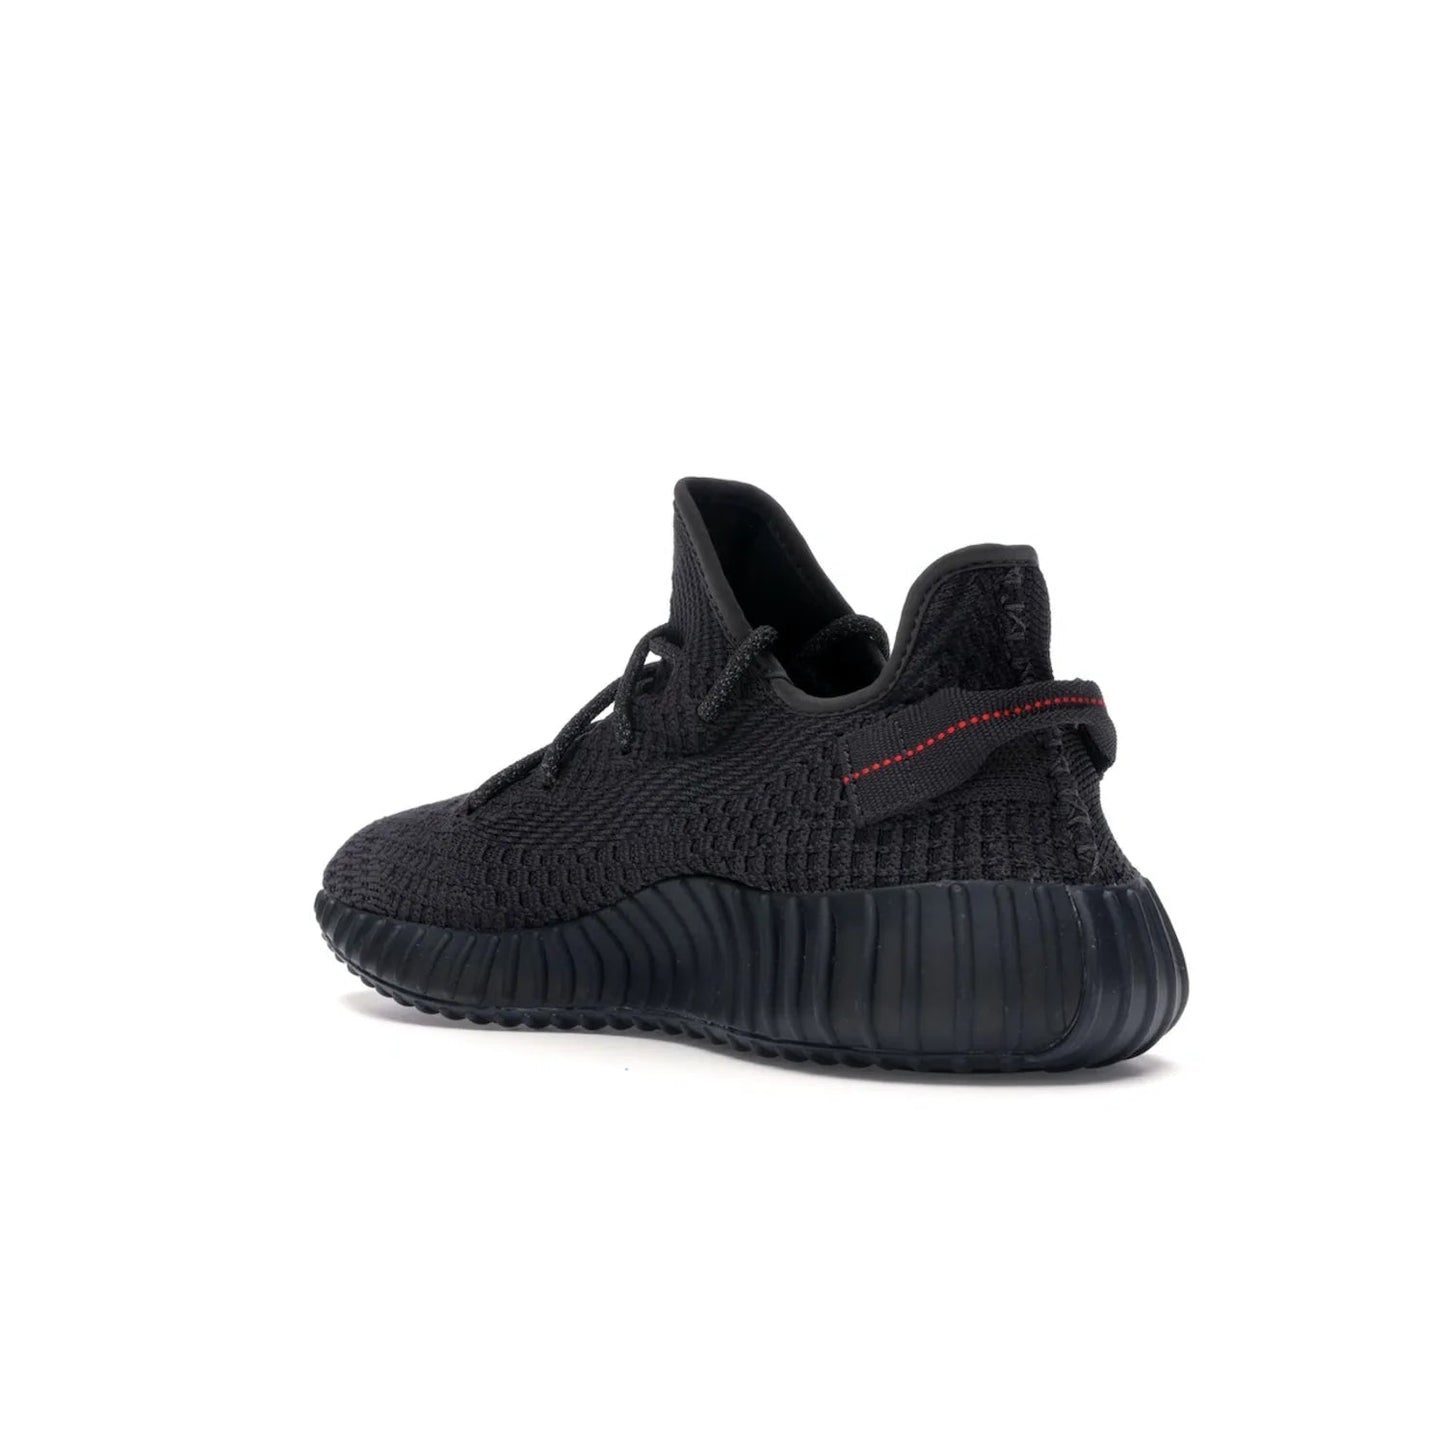 adidas Yeezy Boost 350 V2 Black (Non-Reflective) - Image 24 - Only at www.BallersClubKickz.com - A timeless, sleek silhouette crafted from quality materials. The adidas Yeezy Boost 350 V2 Black (Non-Reflective) brings style and sophistication. Get yours now!